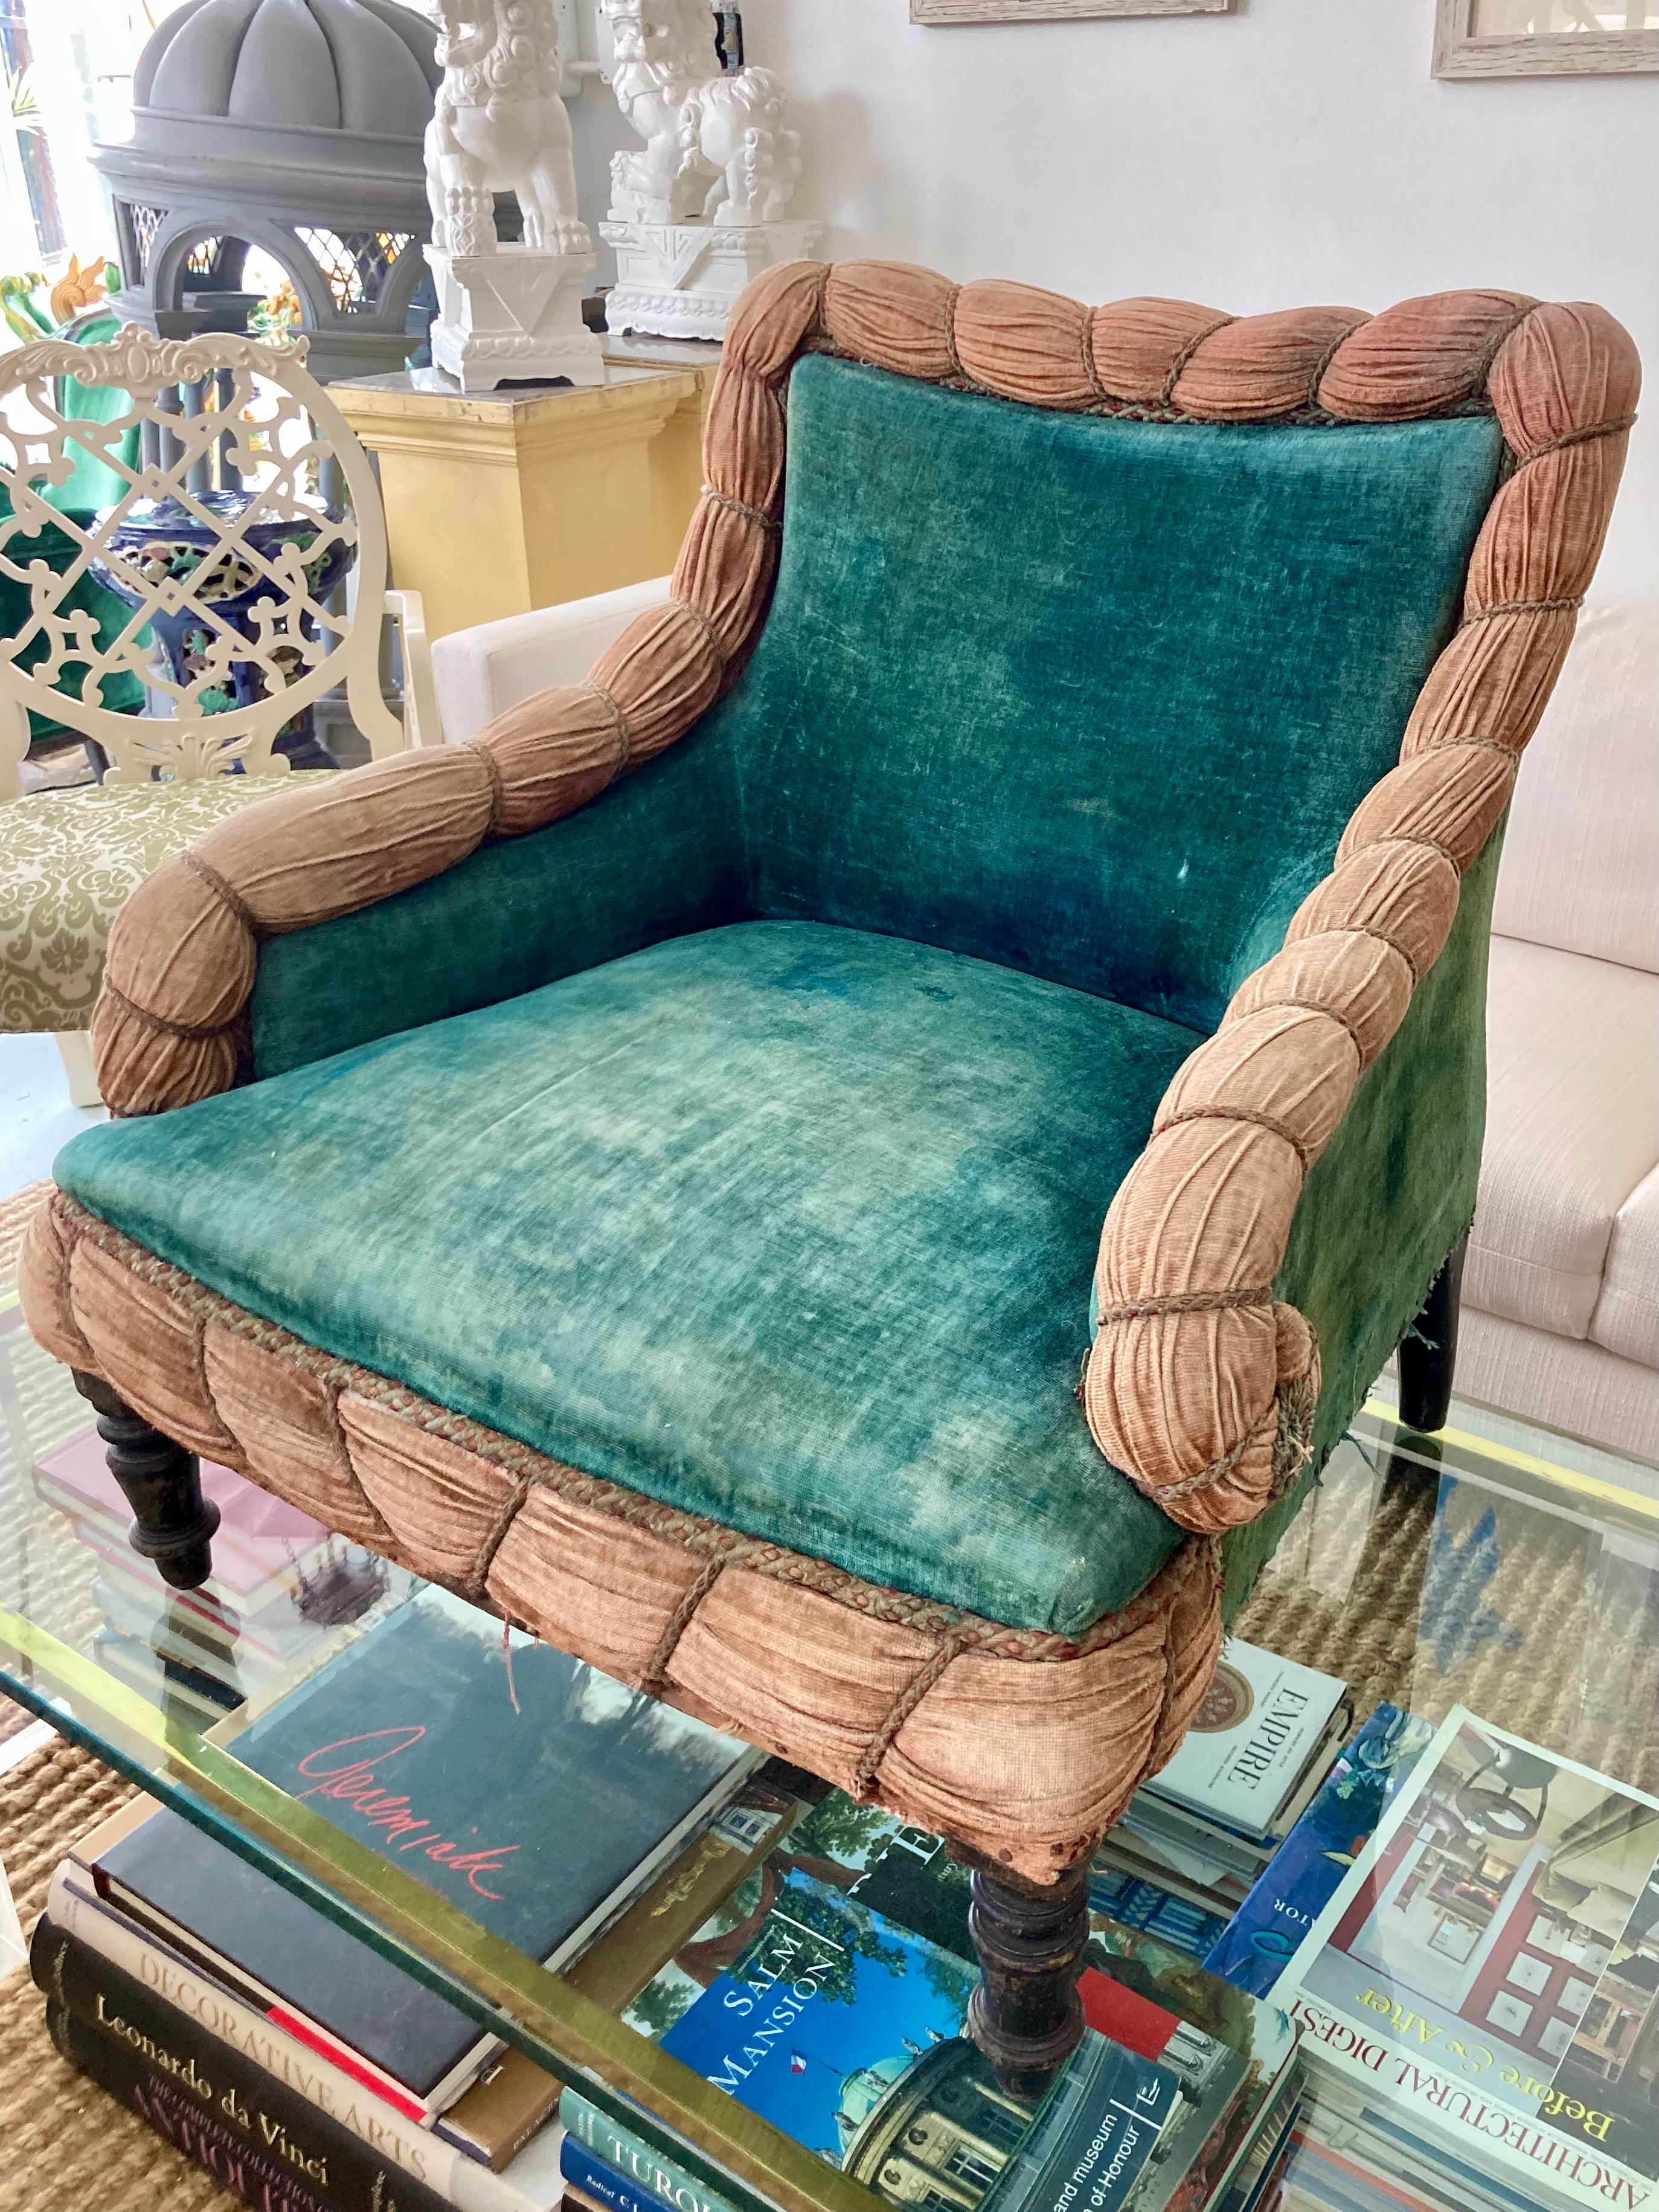 An amazing French Napoleon III club chair from the 19th Century in all original textiles! Leave as is, or have your upholstery service work their magic! Love all the incredible upholstery details. Fabulous!